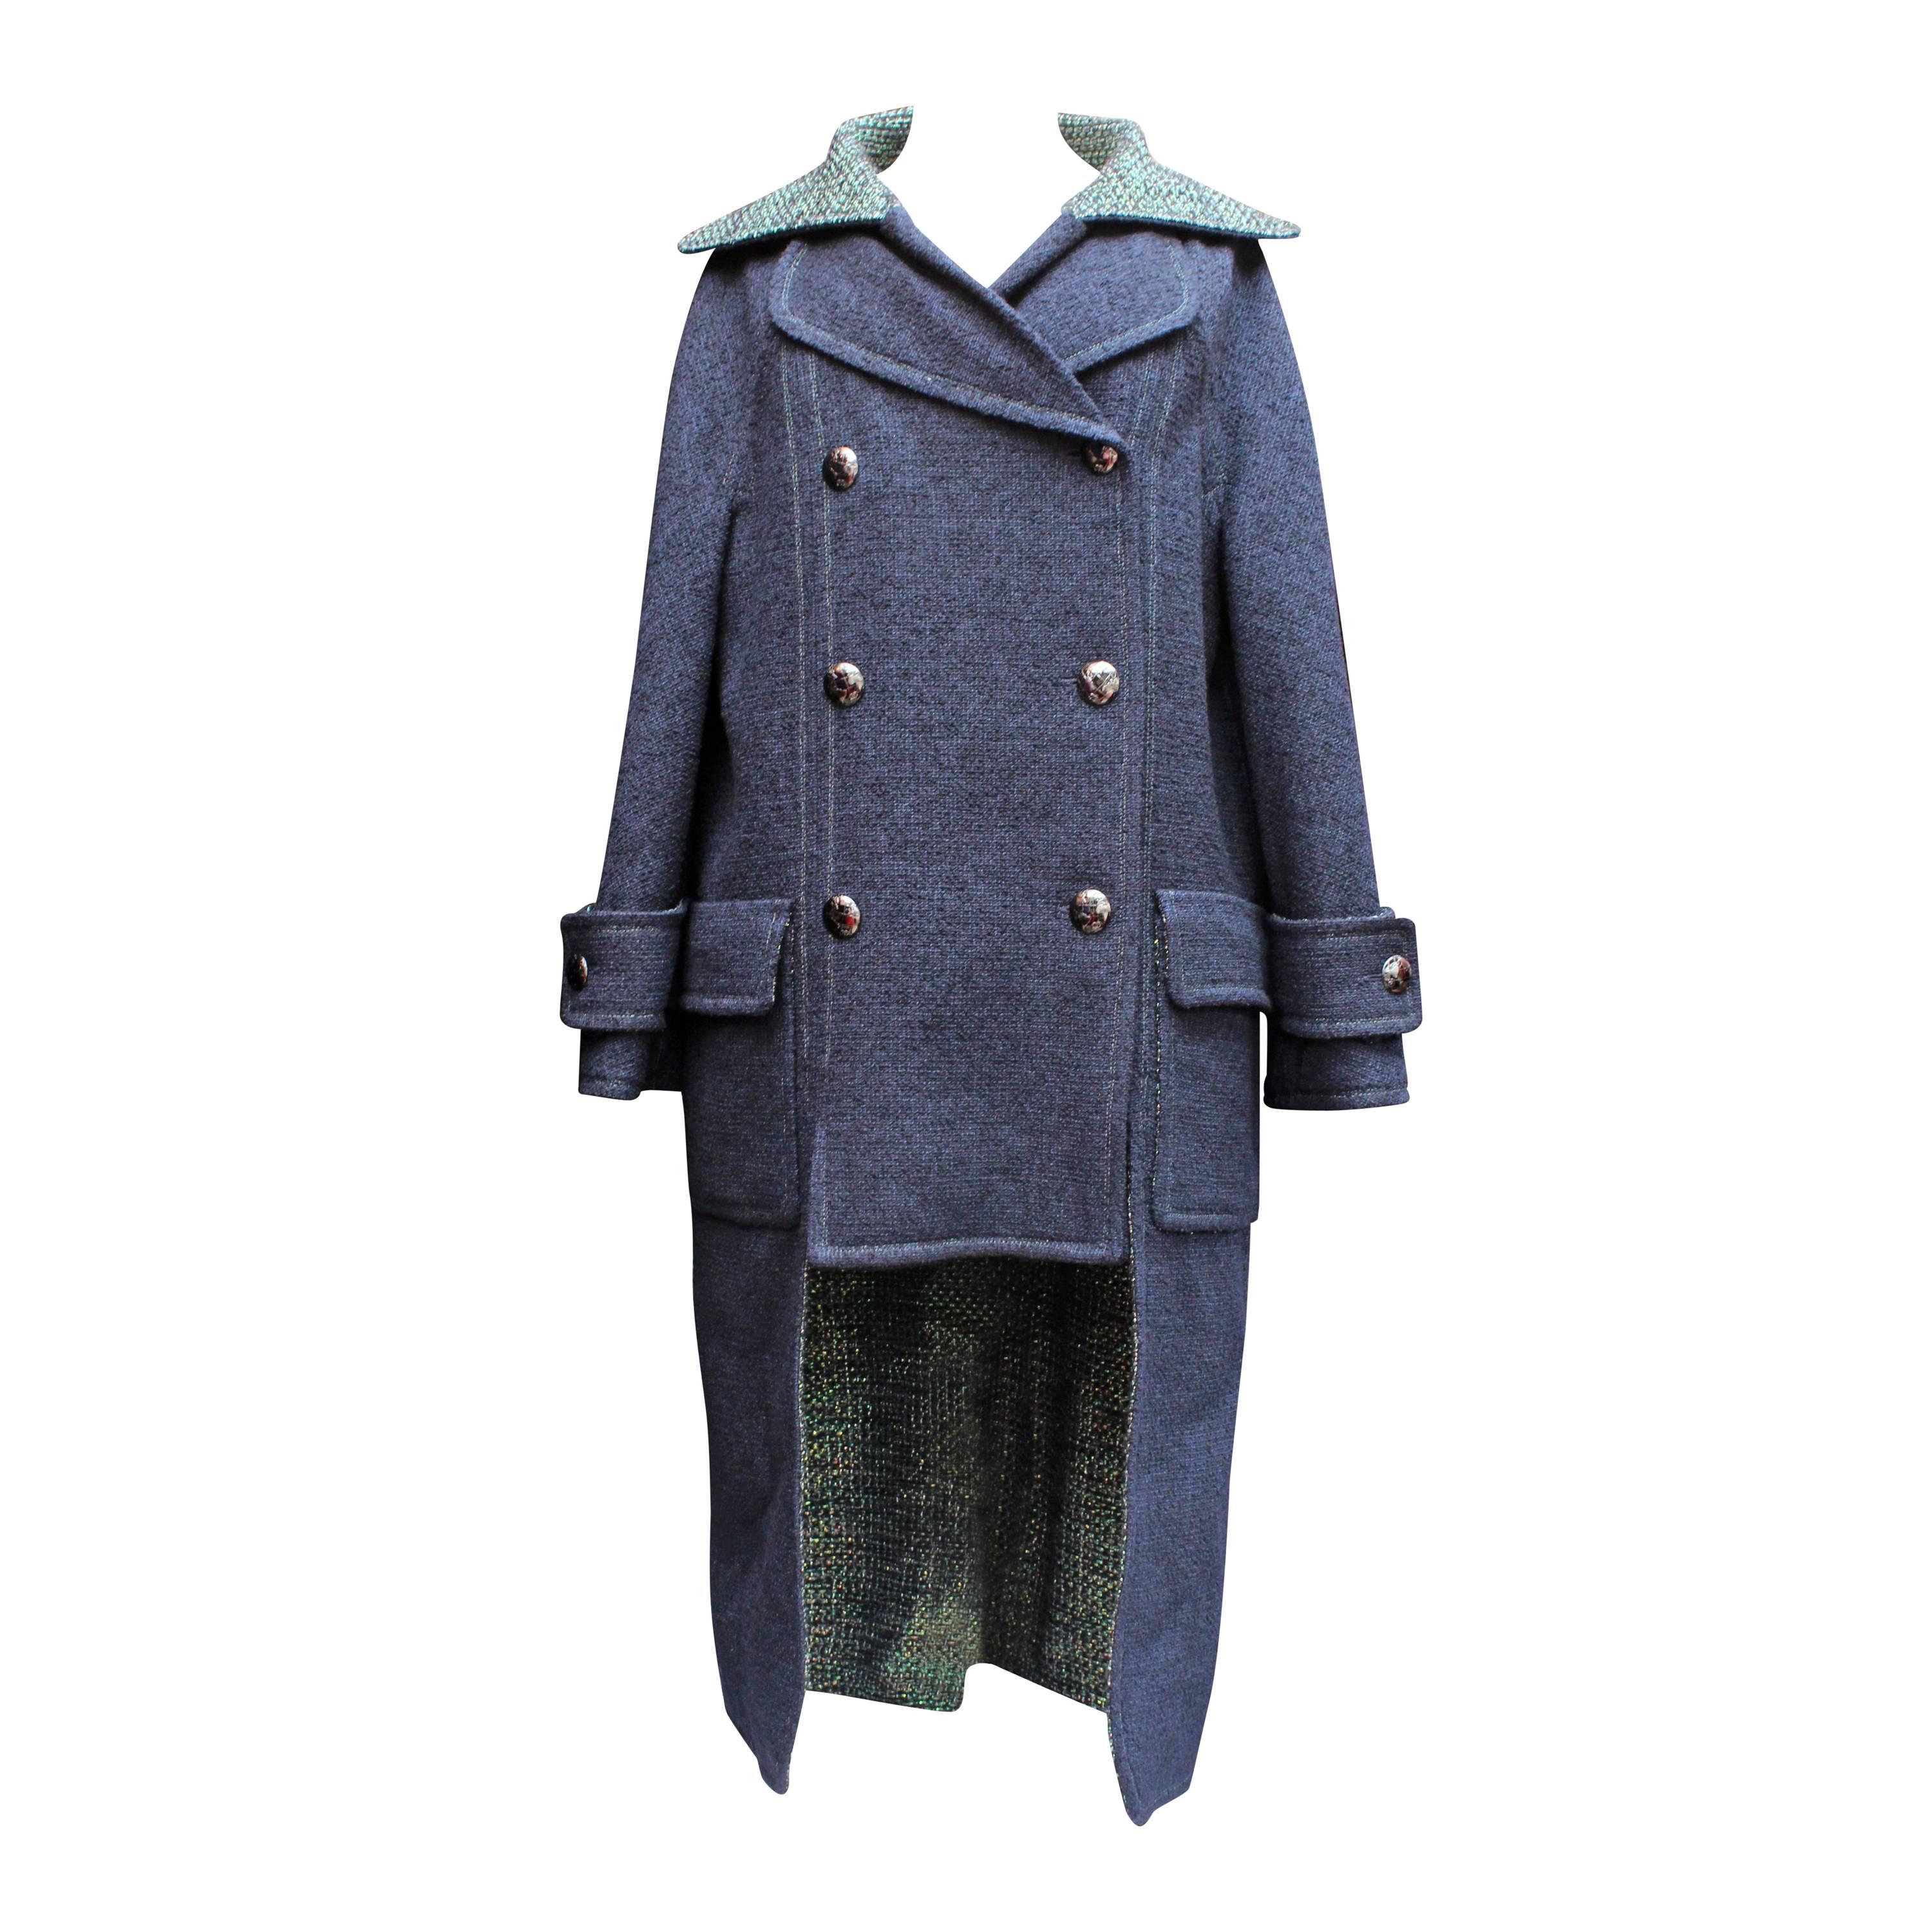 Fall 2013 Chanel Coat in Navy Blue and Iridescent Green Wool Tweed